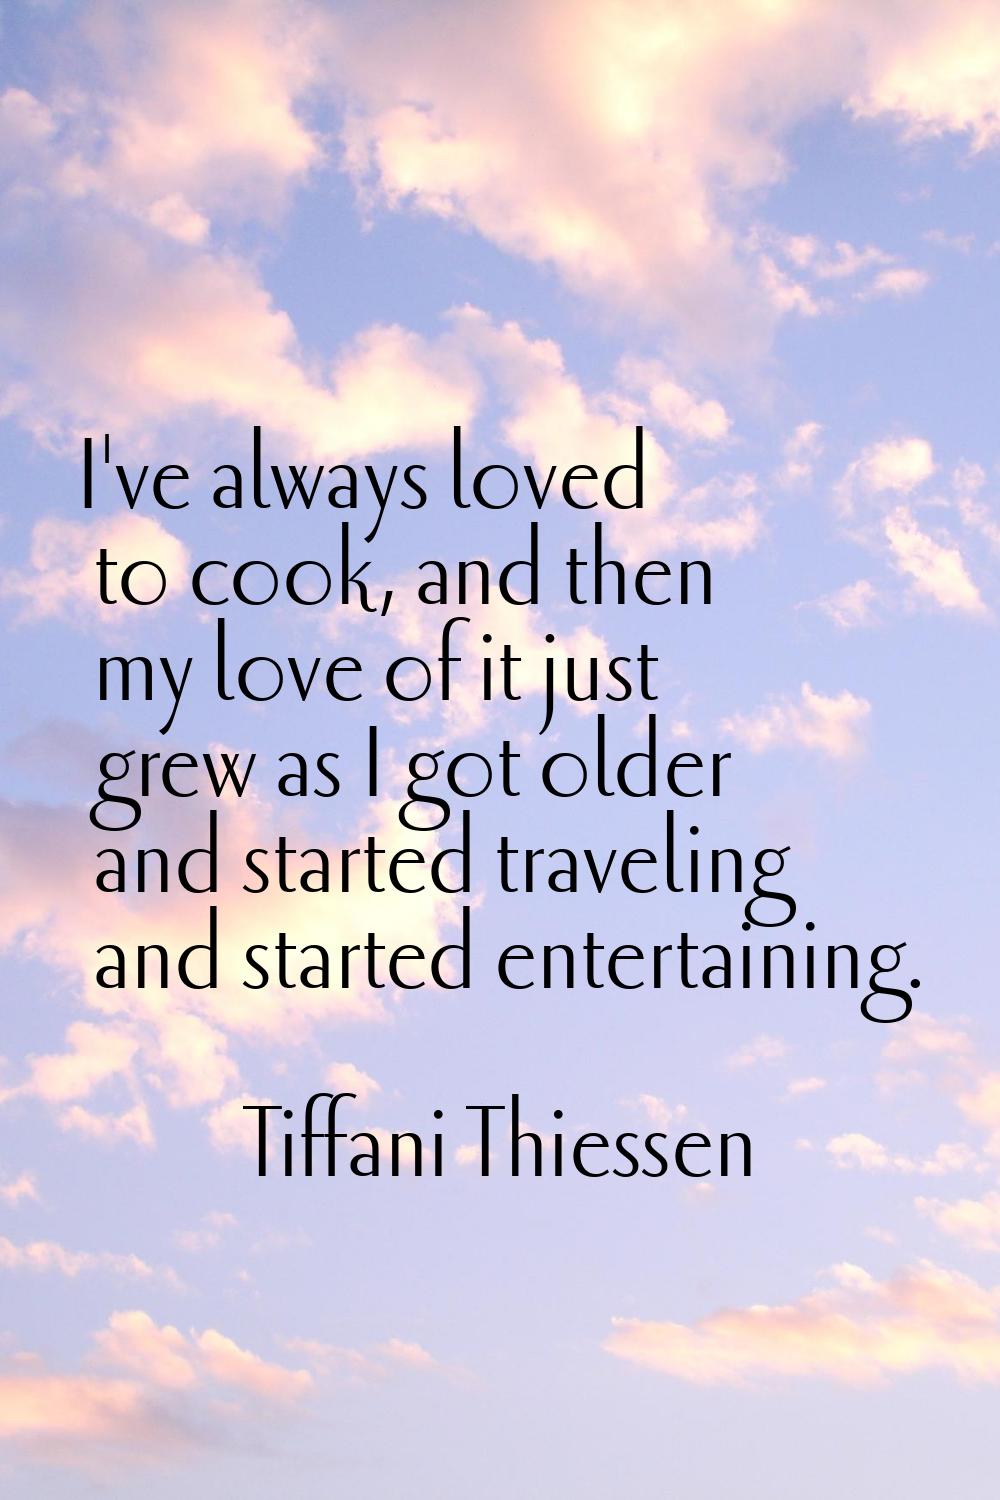 I've always loved to cook, and then my love of it just grew as I got older and started traveling an